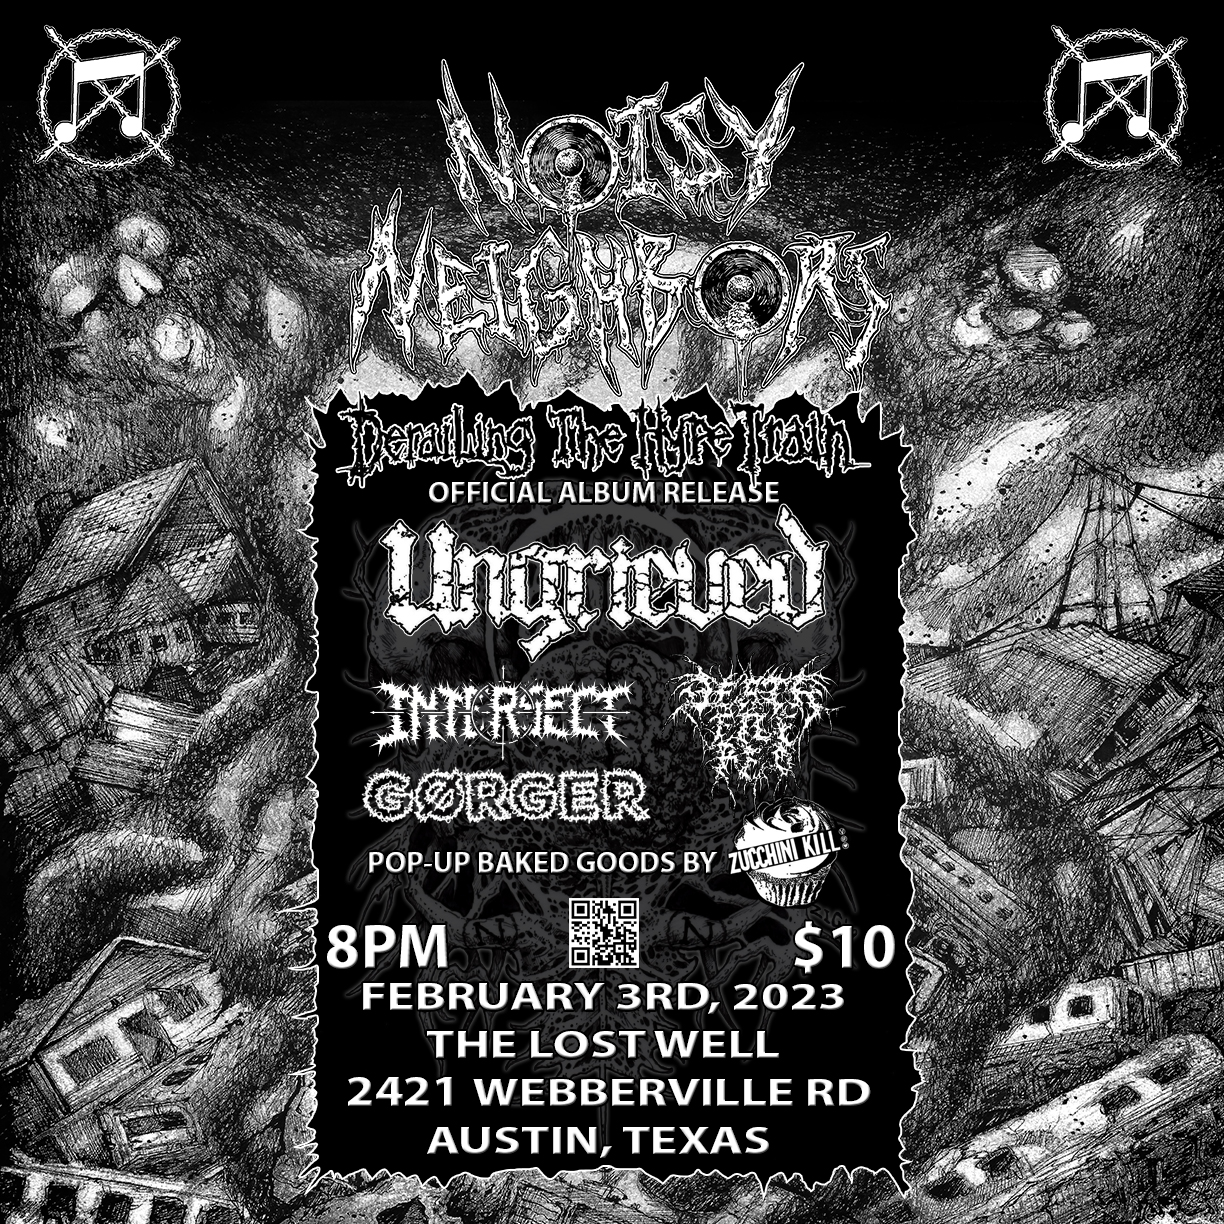 NOISY NEIGHBORS (RECORD RELEASE) \ UNGRIEVED \ INTERSECT \ DEATH FILE RED \ GØRGER